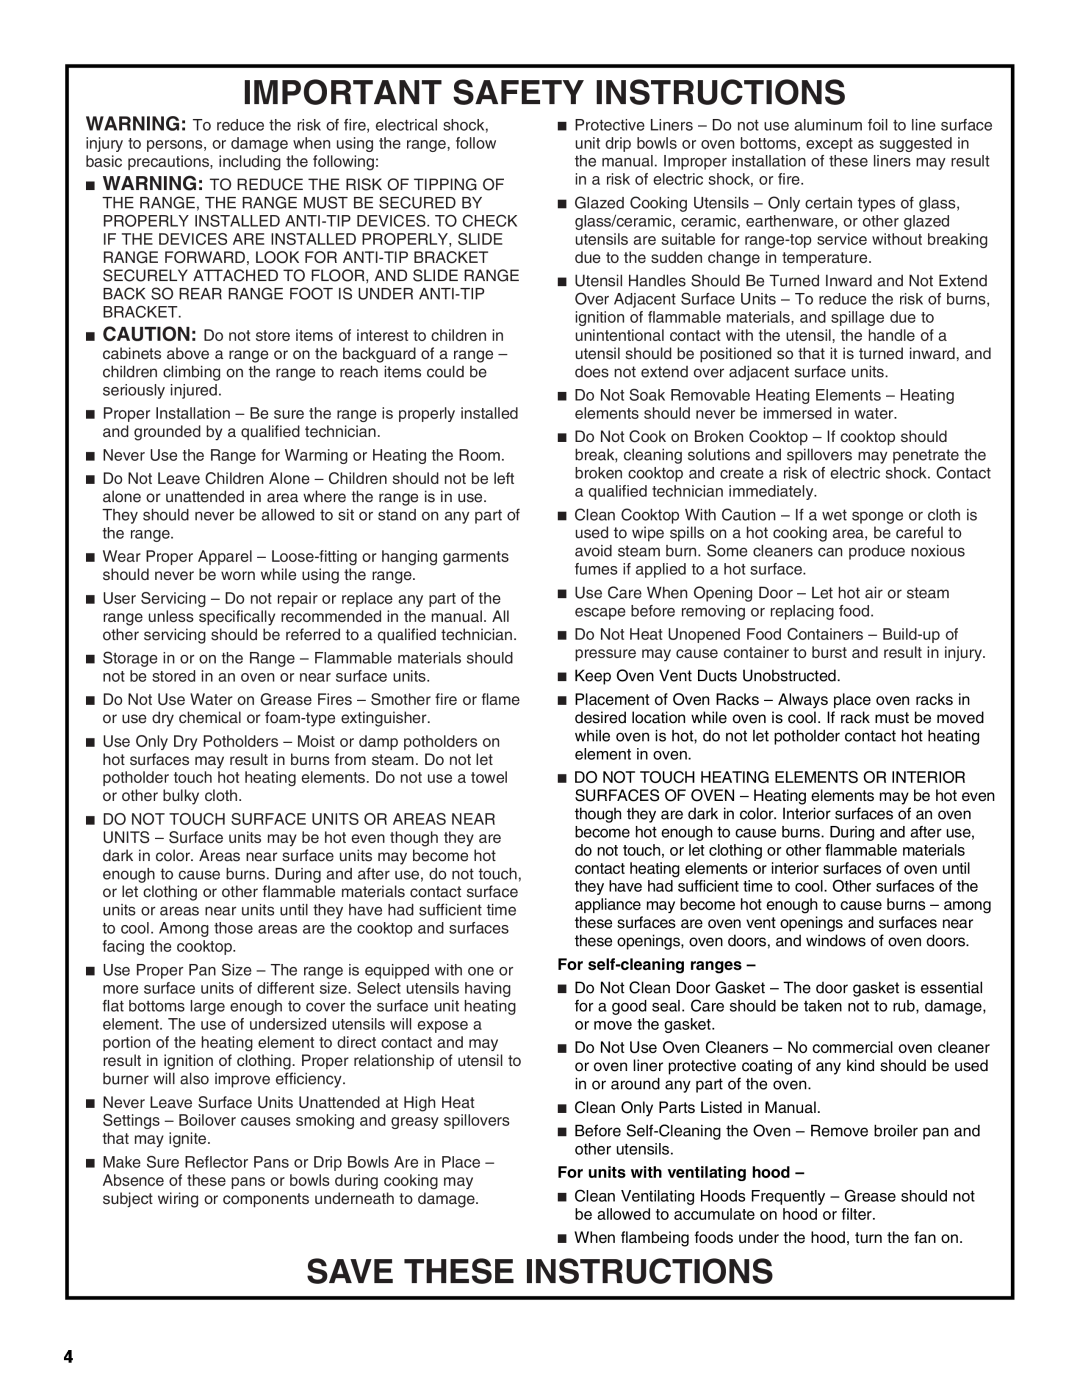 Amana AEP222VAW manual Important Safety Instructions, Save These Instructions, For self-cleaningranges 